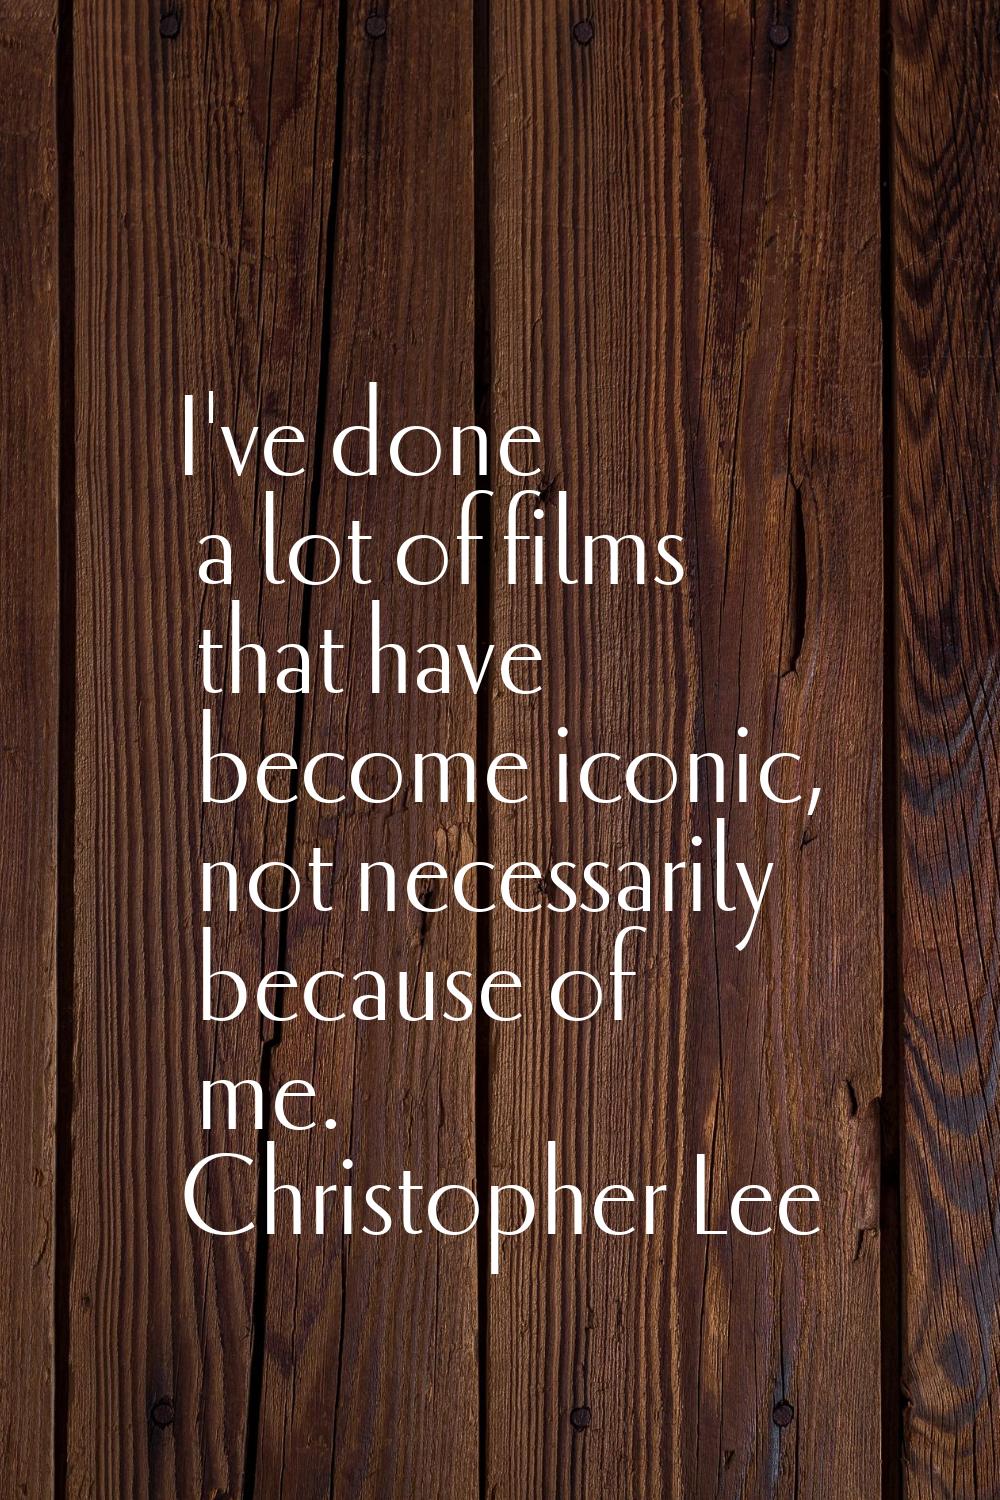 I've done a lot of films that have become iconic, not necessarily because of me.